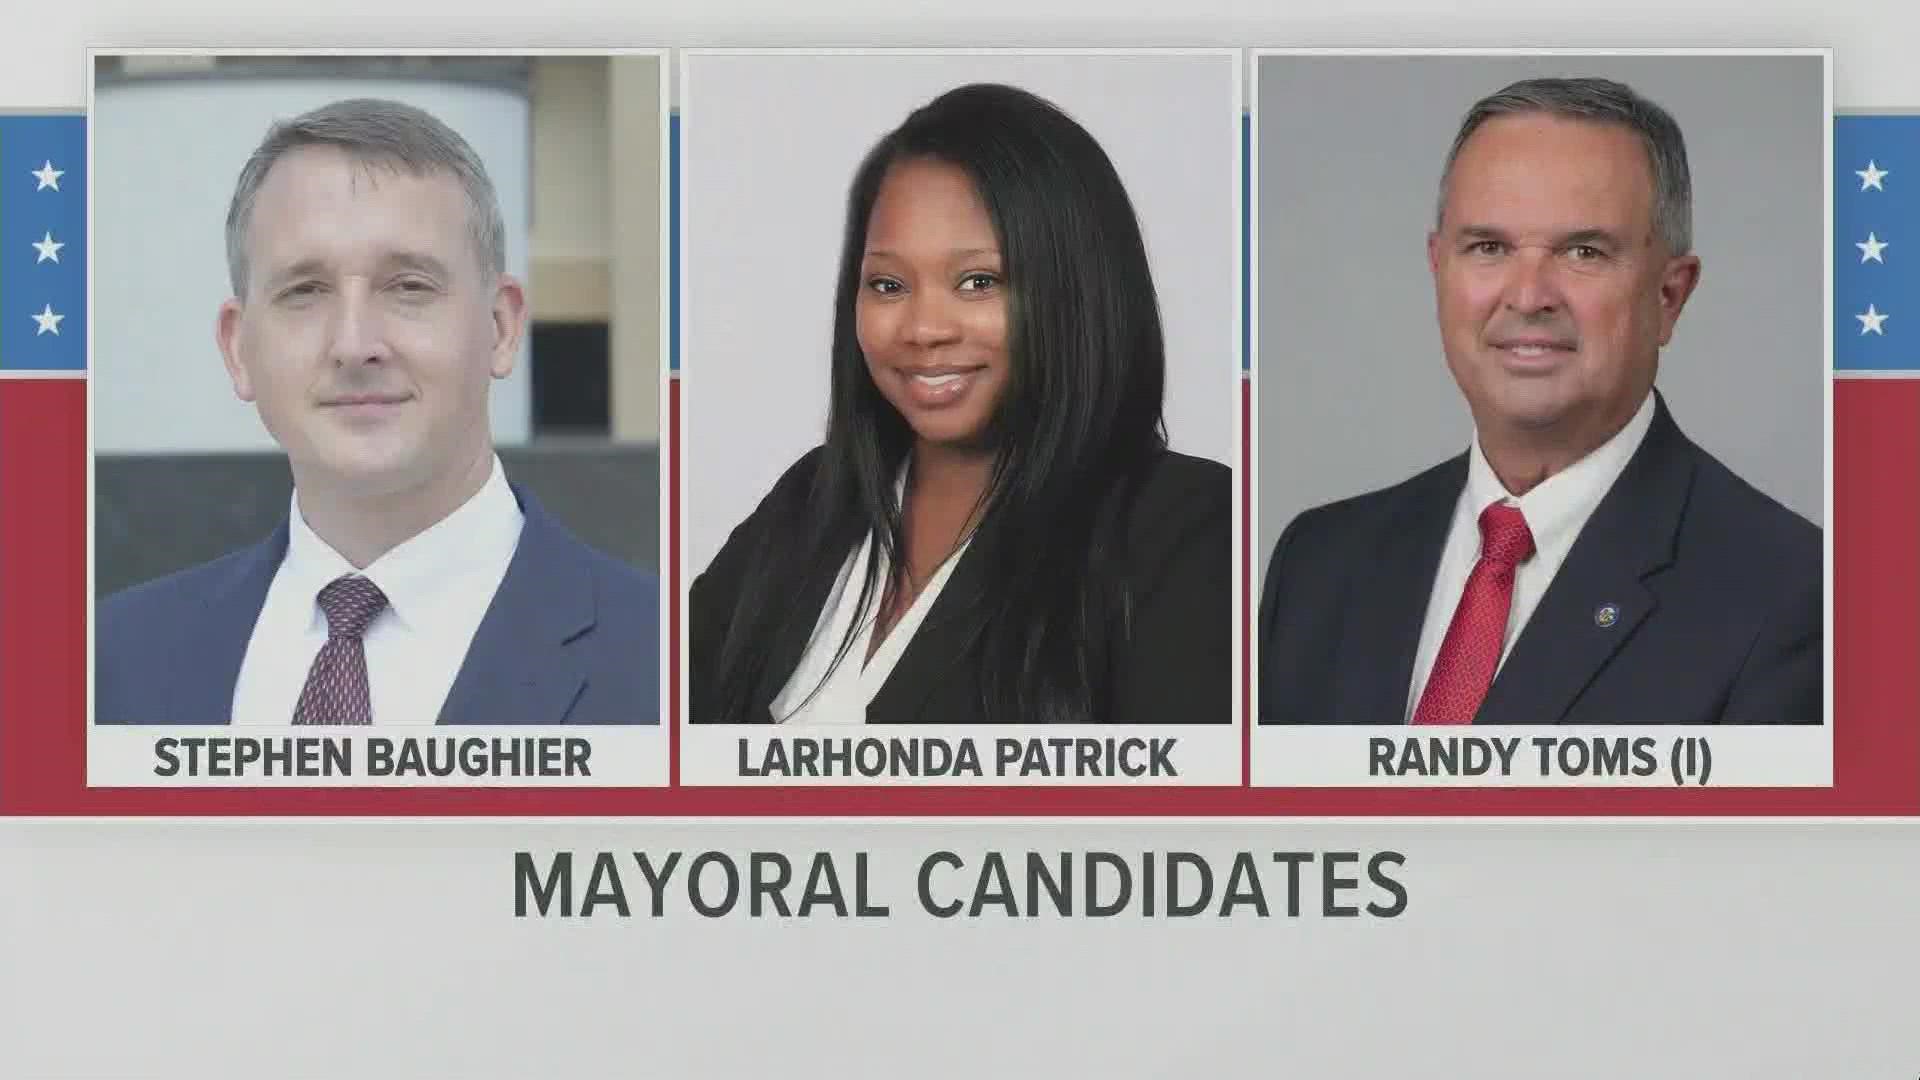 Current Mayor Randy Toms faces challengers LaRhonda Patrick and Stephen Baughier in the race.